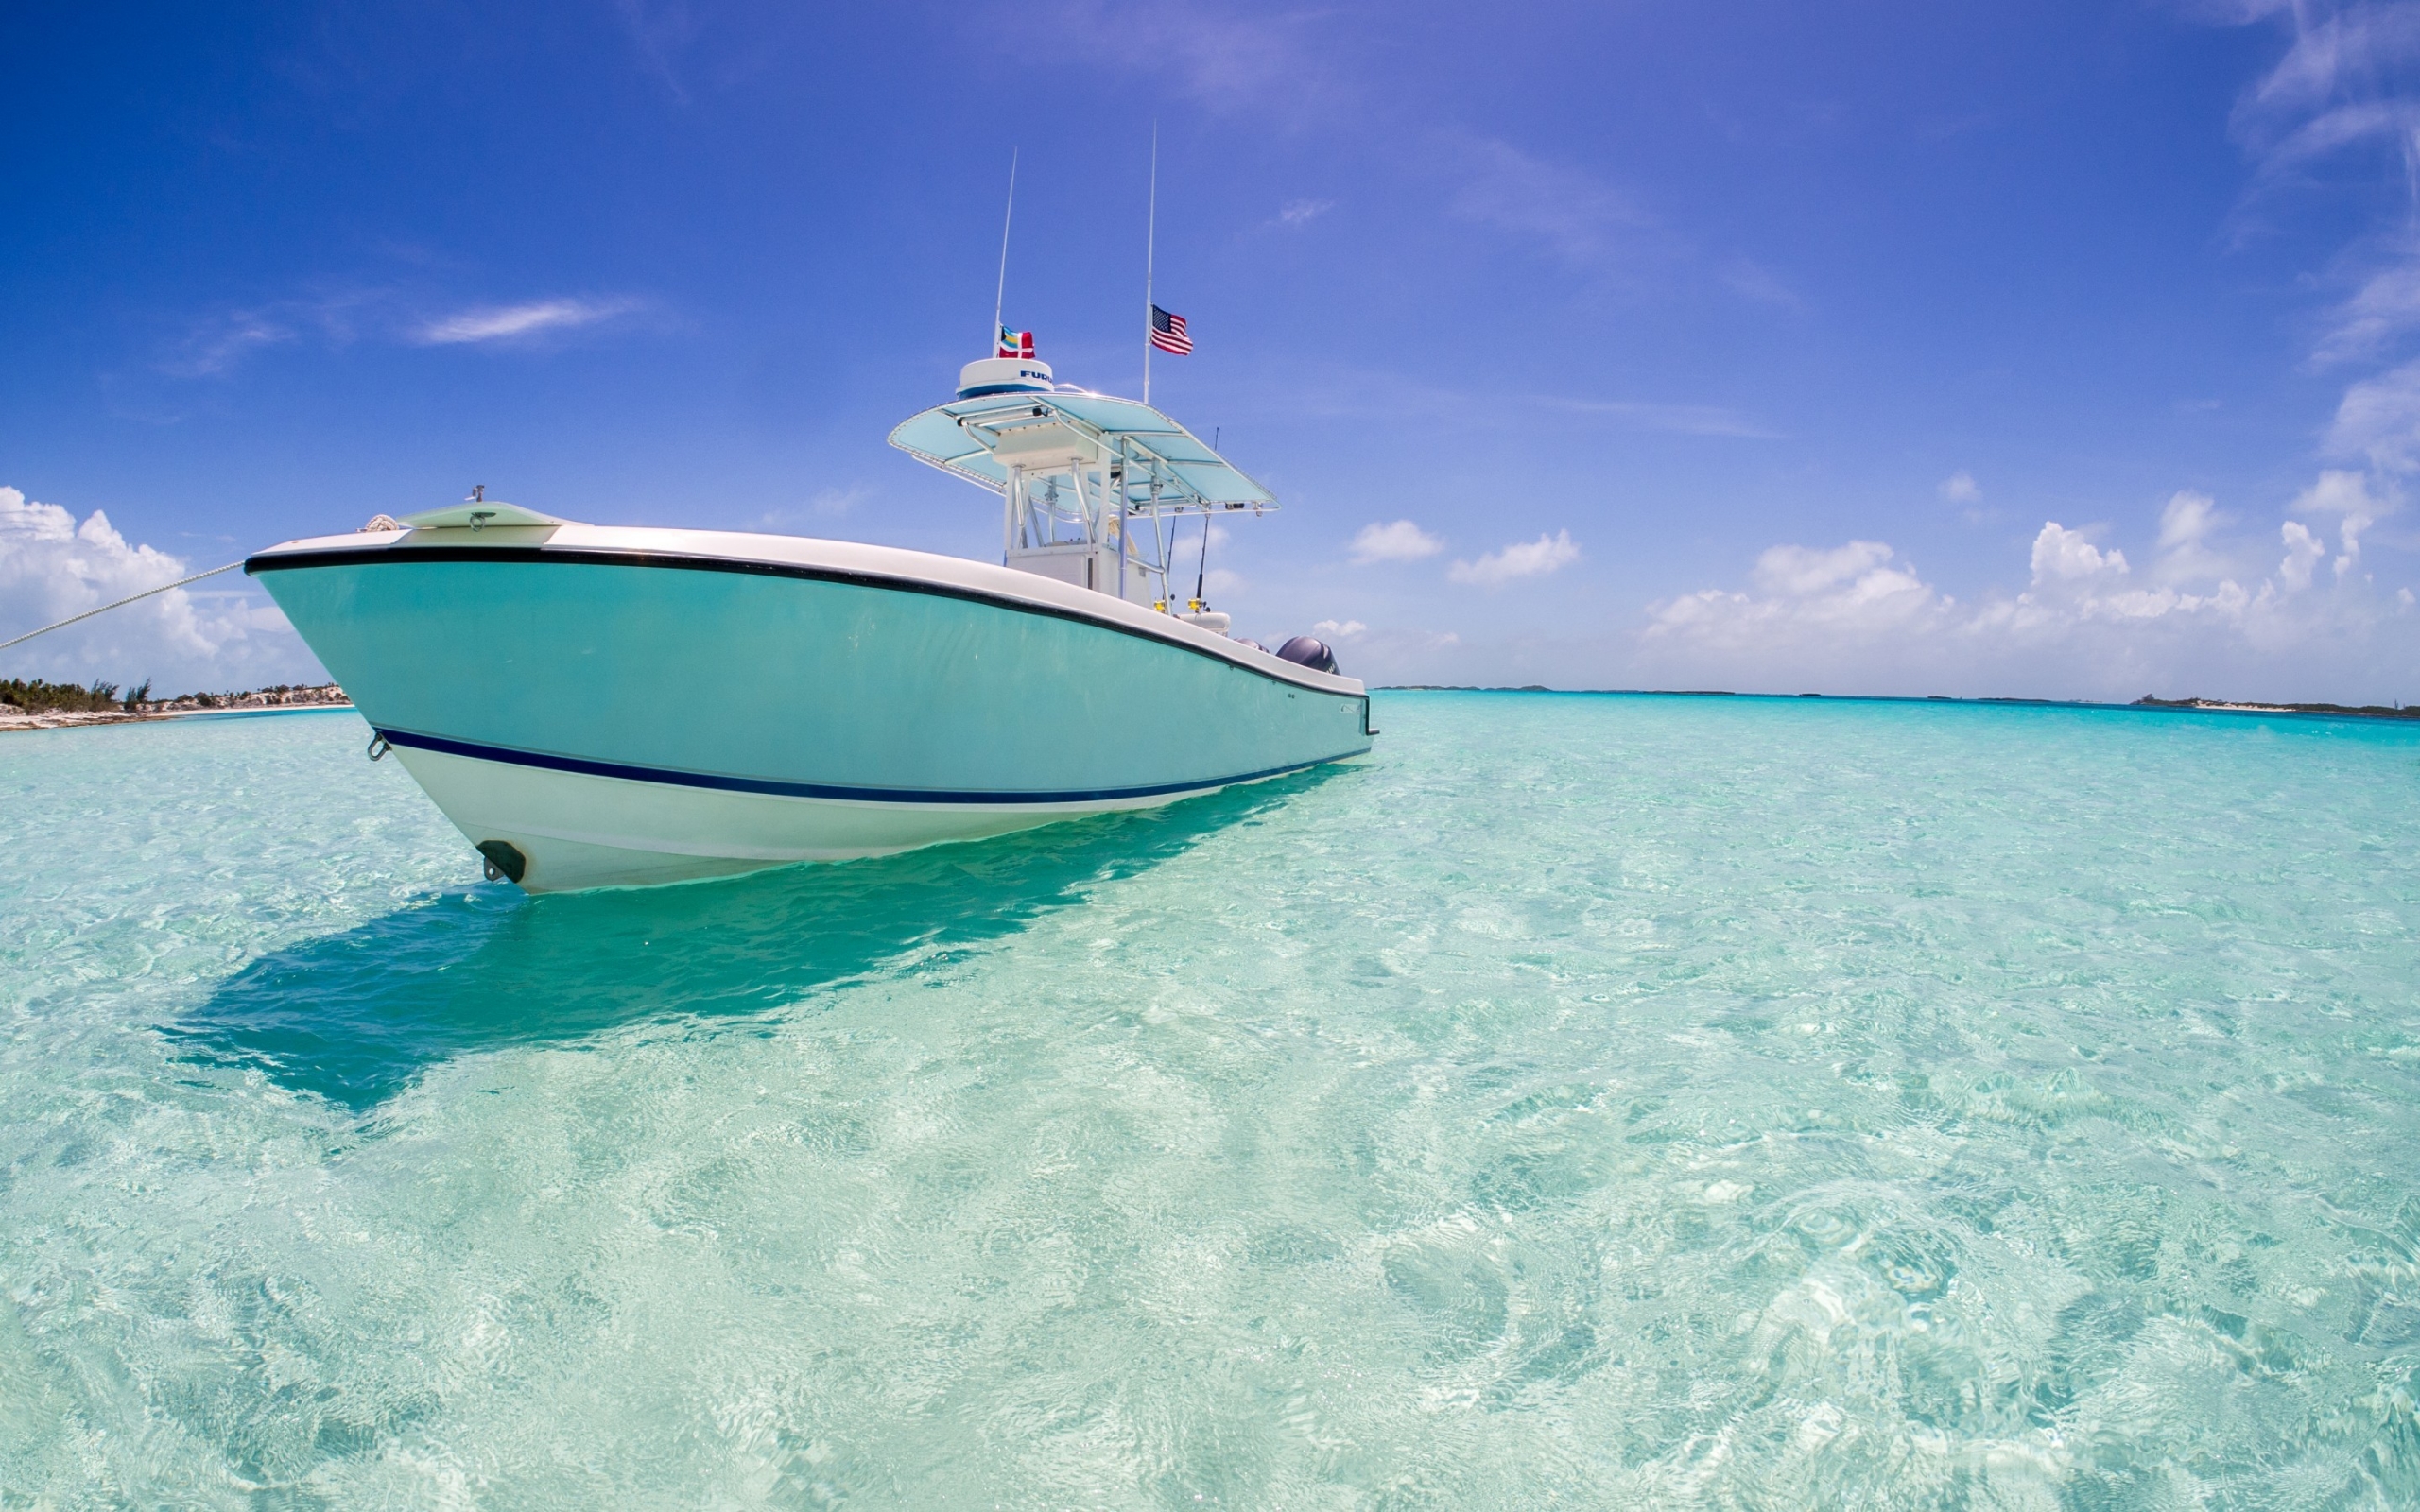 Boat in Paradise for 2560 x 1600 widescreen resolution